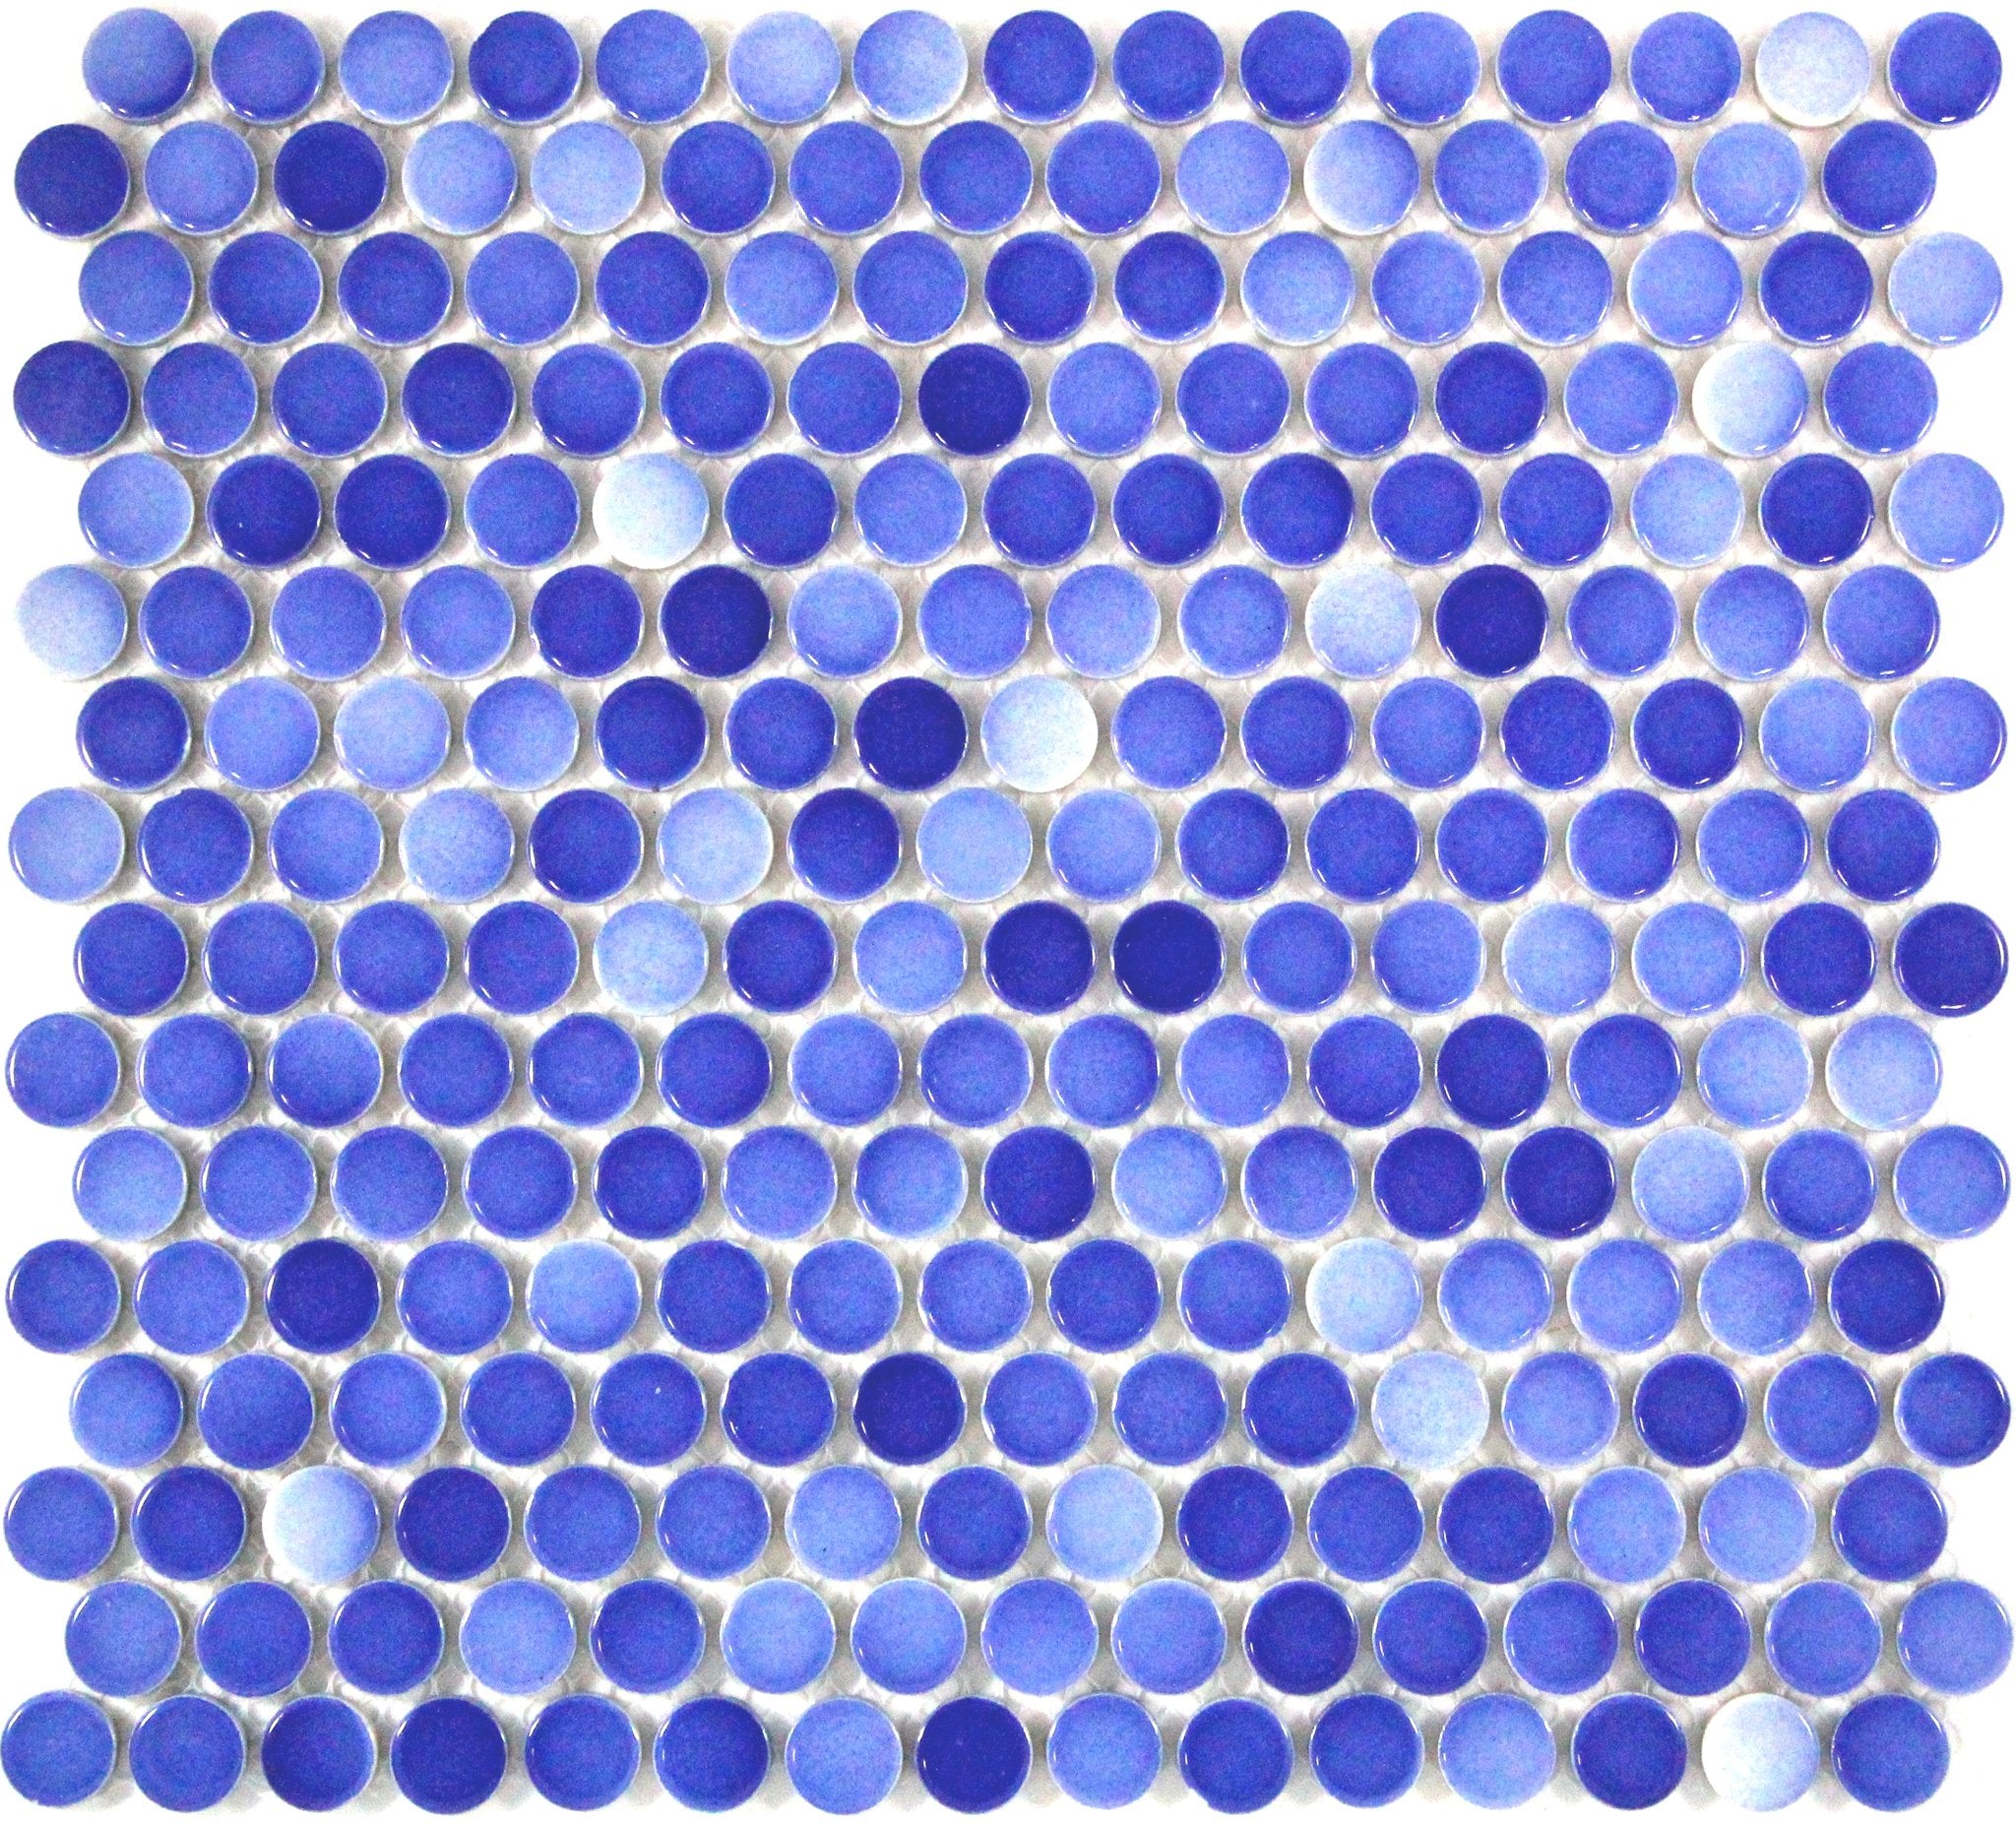 Blue Mix Gloss Penny Round Mosaic Tile 19mm